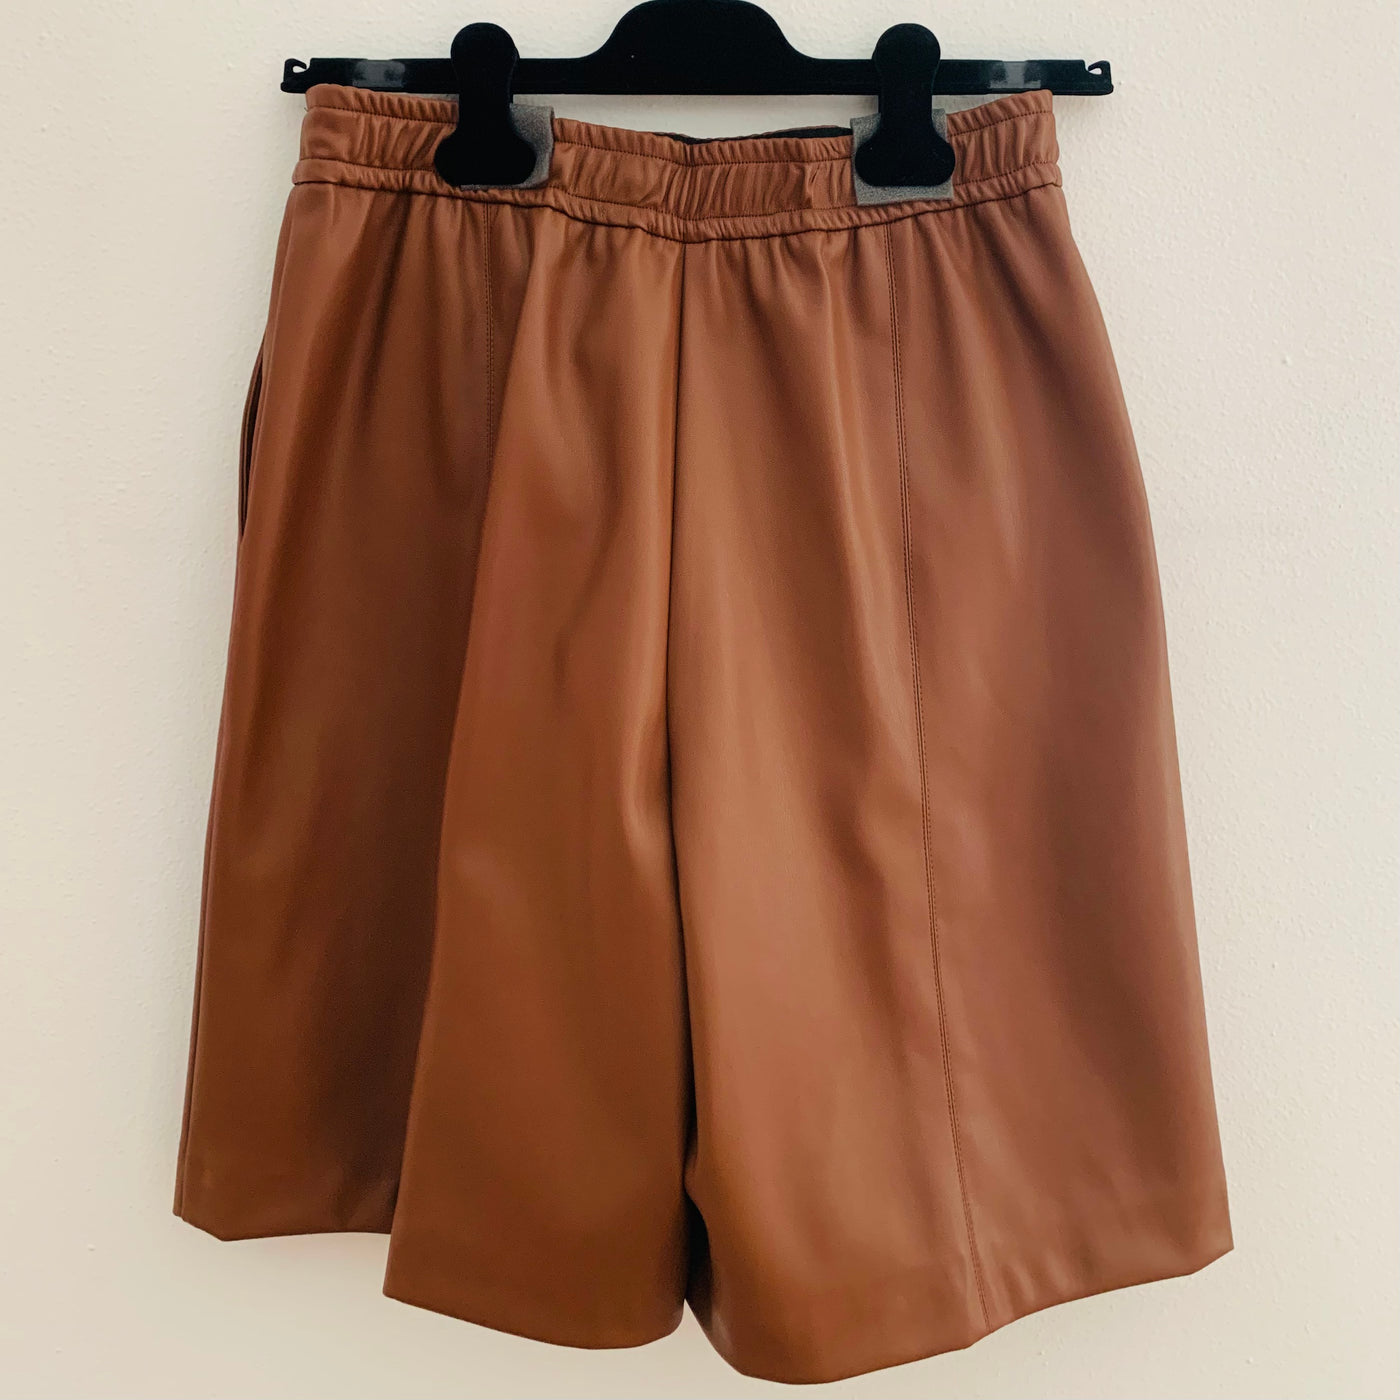 (nude) - Brown eco leather shorts